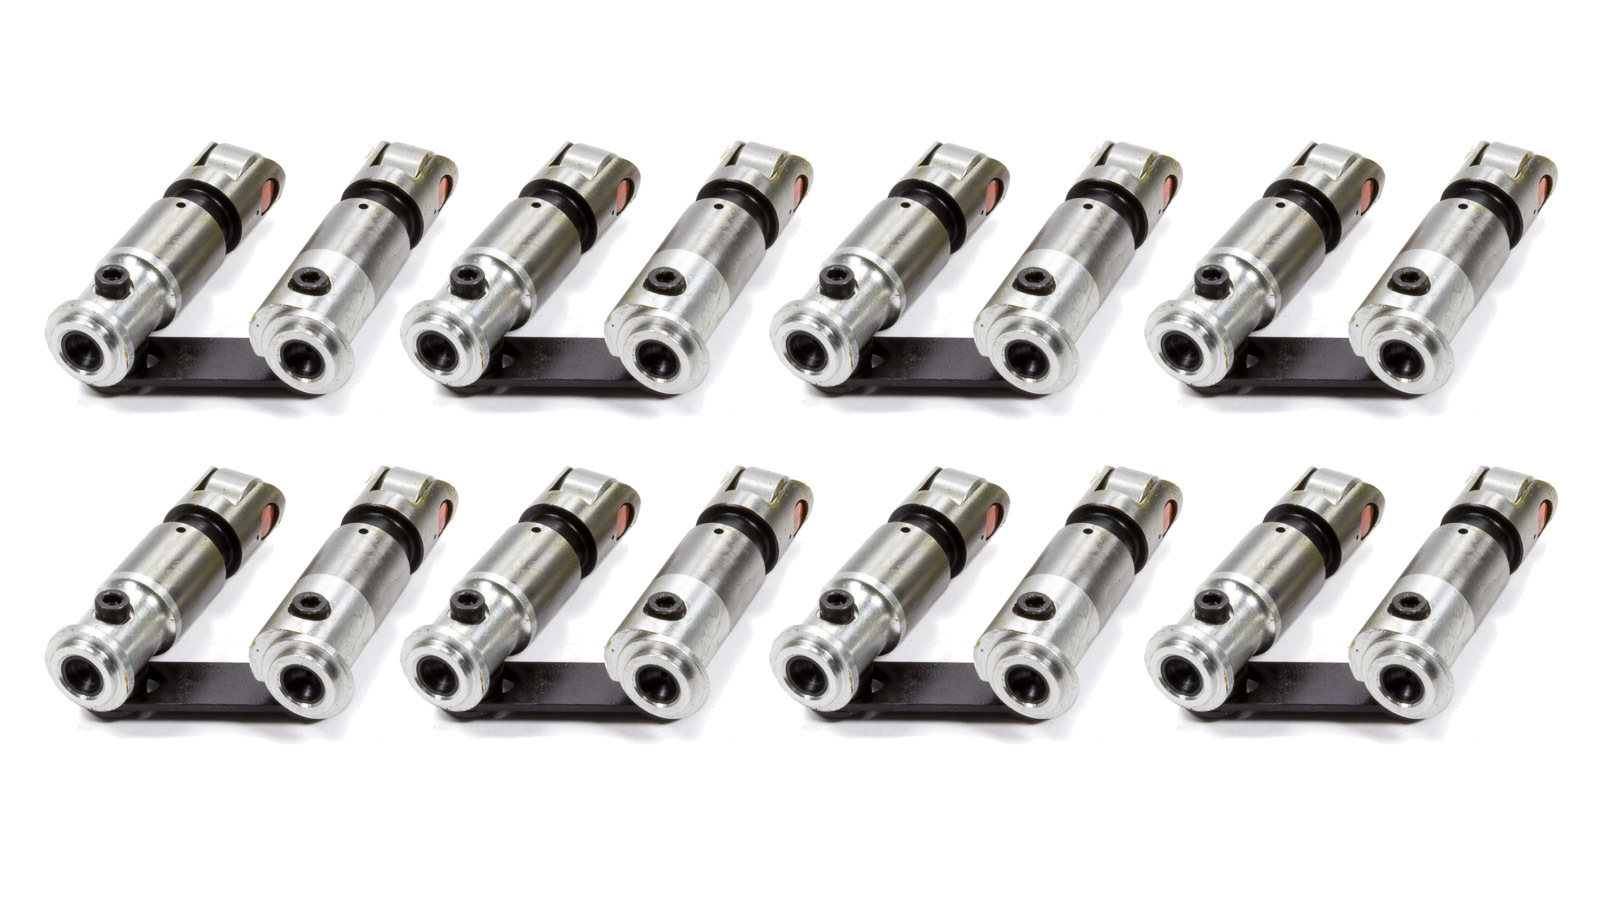 Isky Cams 1271LO185EZMAX Lifter, Extreme Zone EZ-RollMAX, Mechanical Roller, 0.185 in Offset, Vertical Link Bar, Small Block Chevy, Set of 16